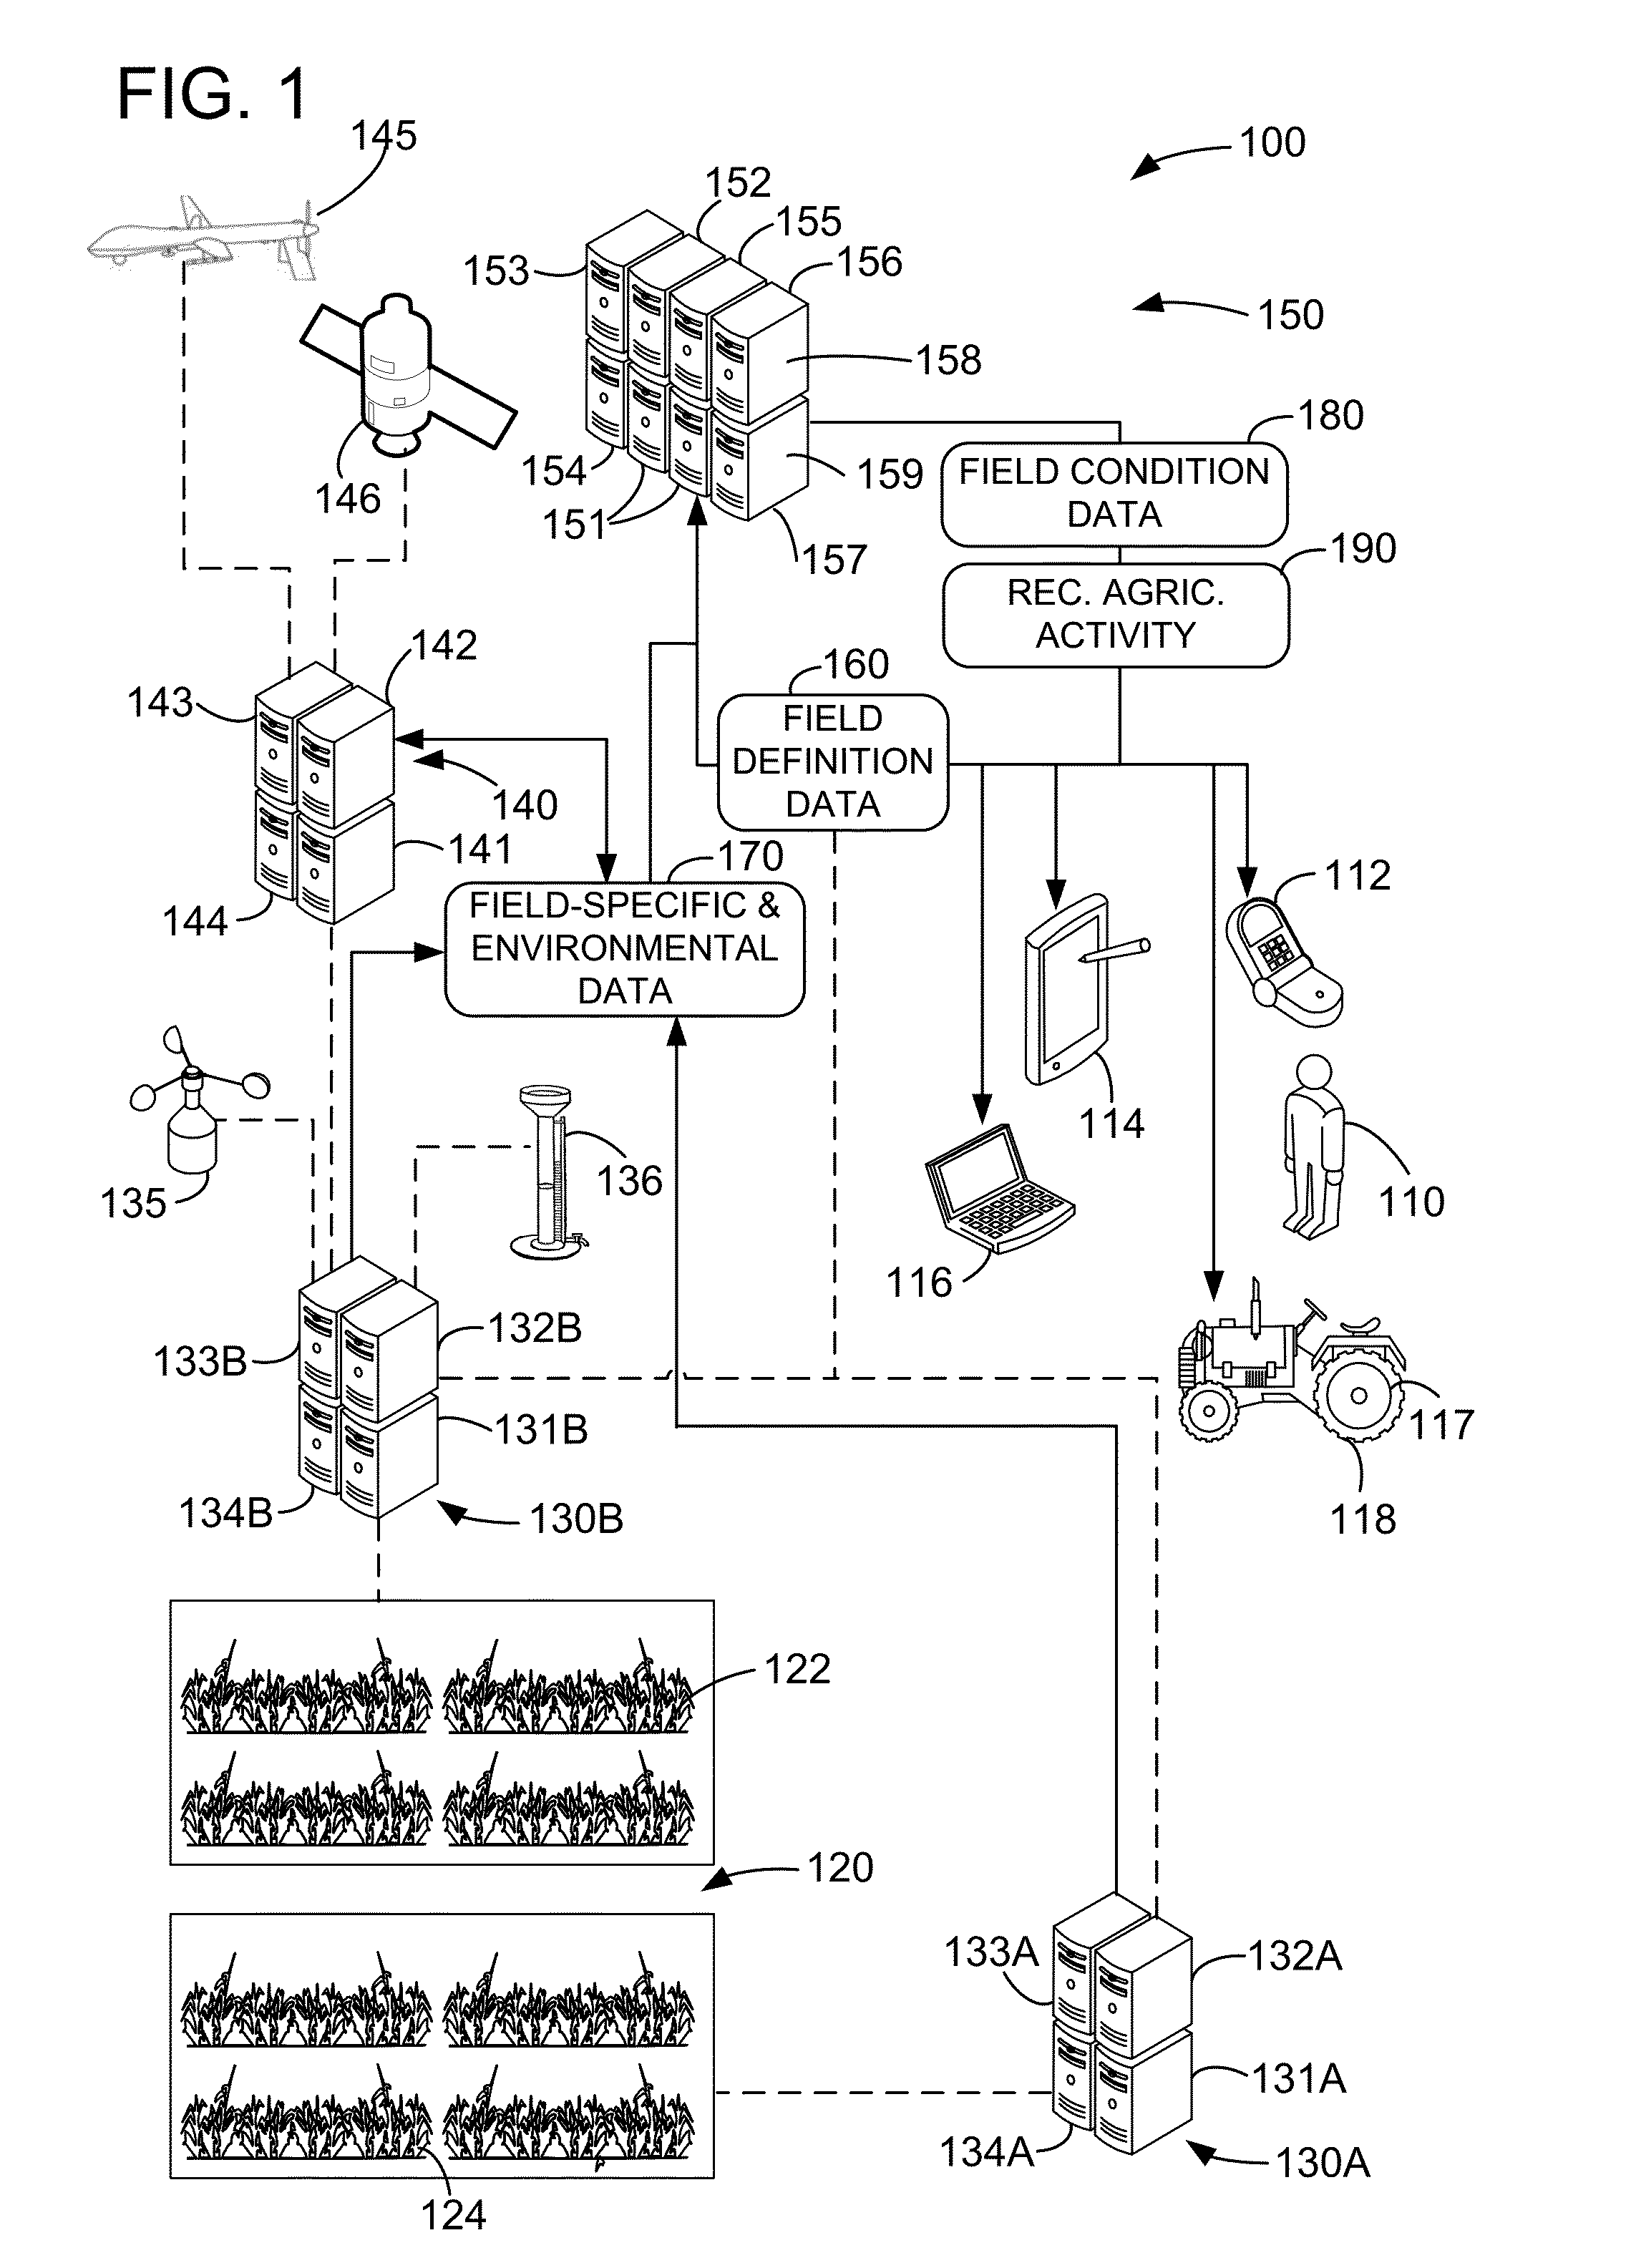 Methods and systems for managing crop harvesting activities